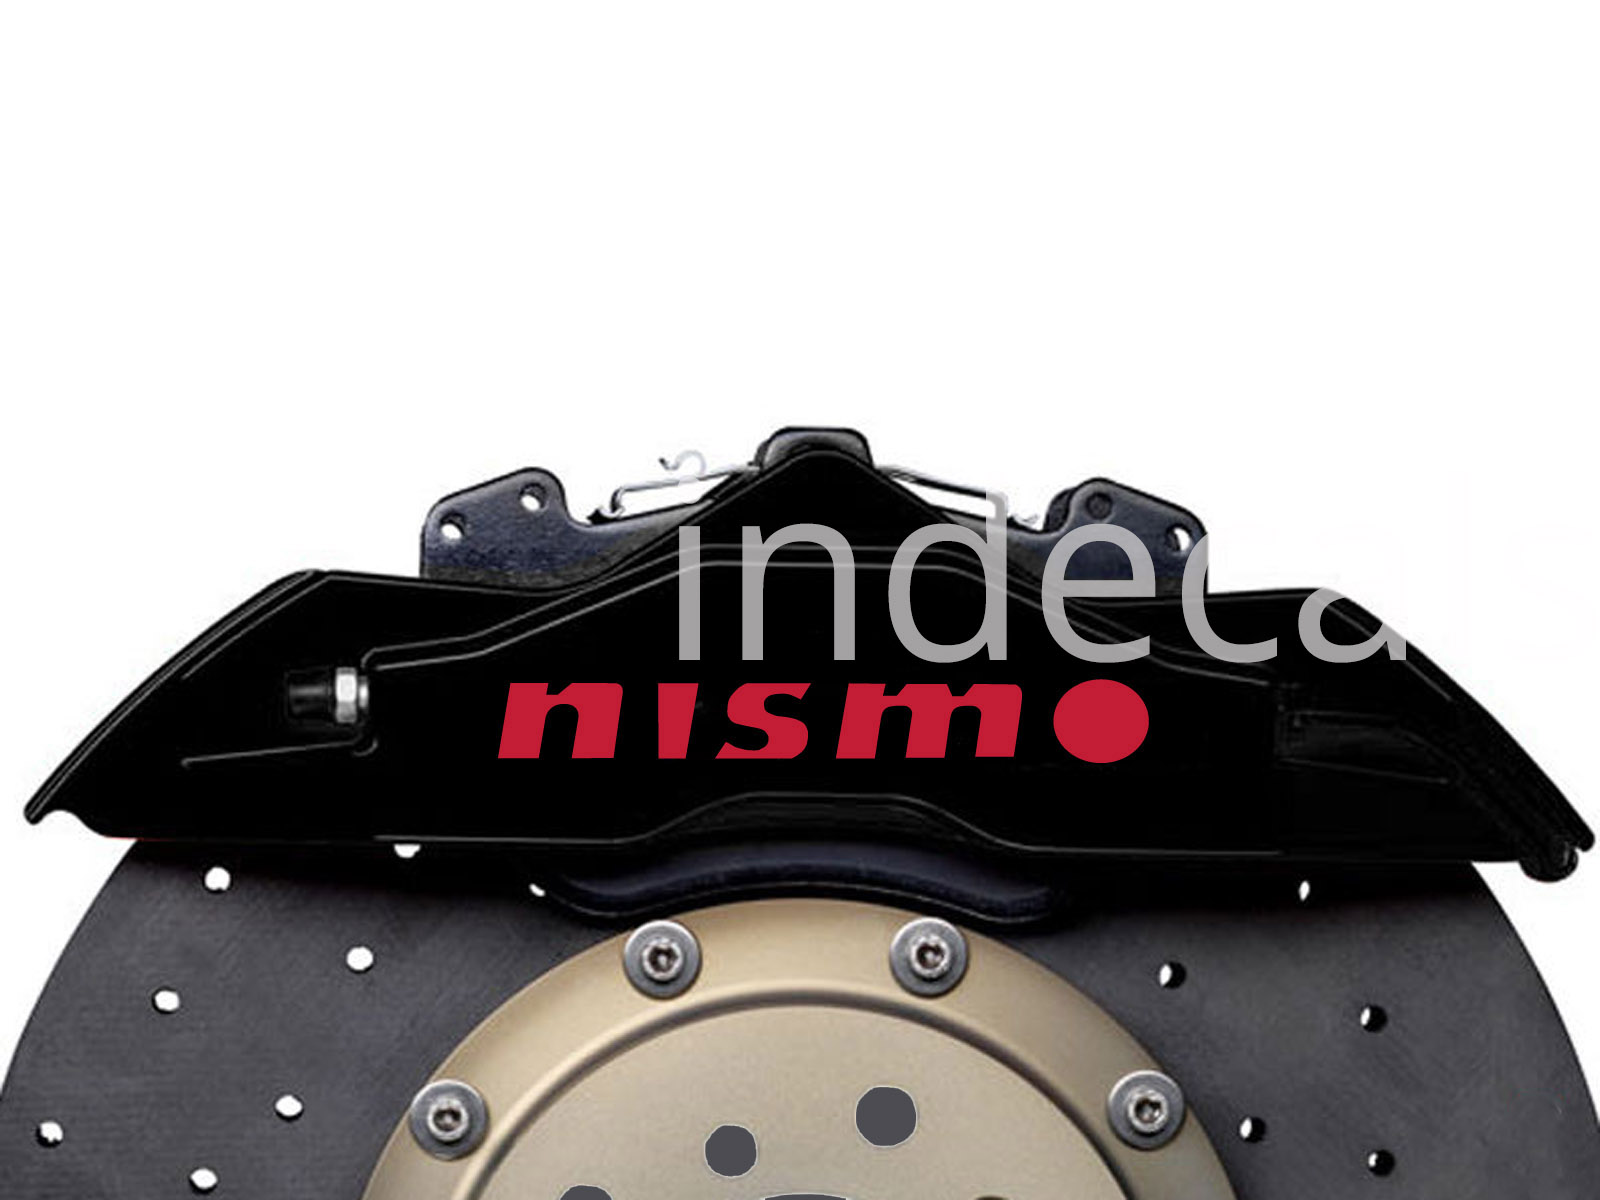 6 x Nismo Stickers for Brakes - Red